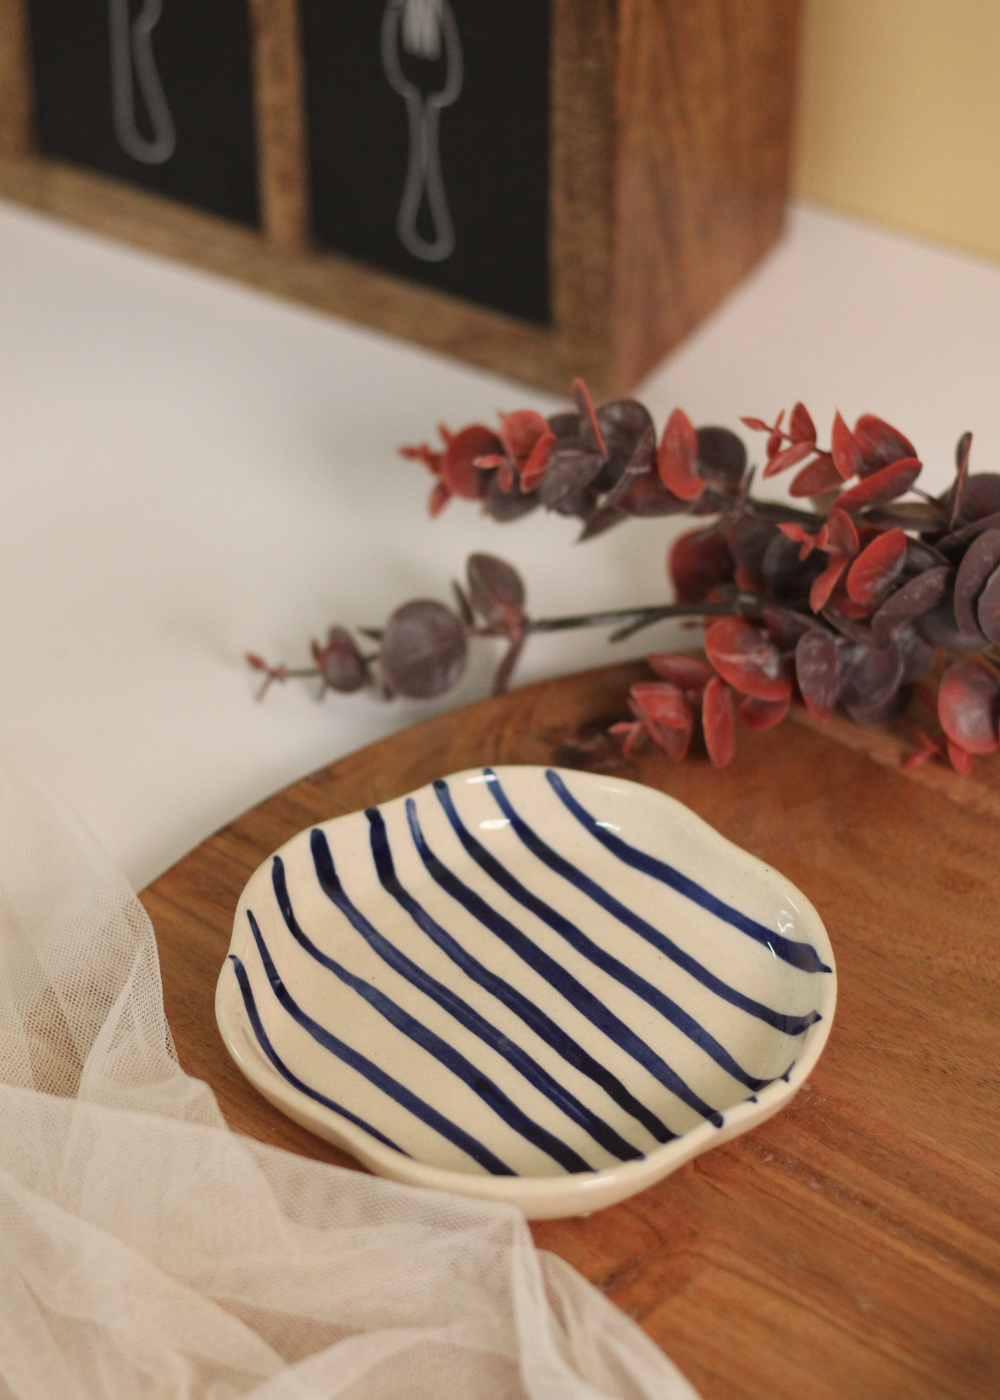 Blue lined dessert plate on wooden surface